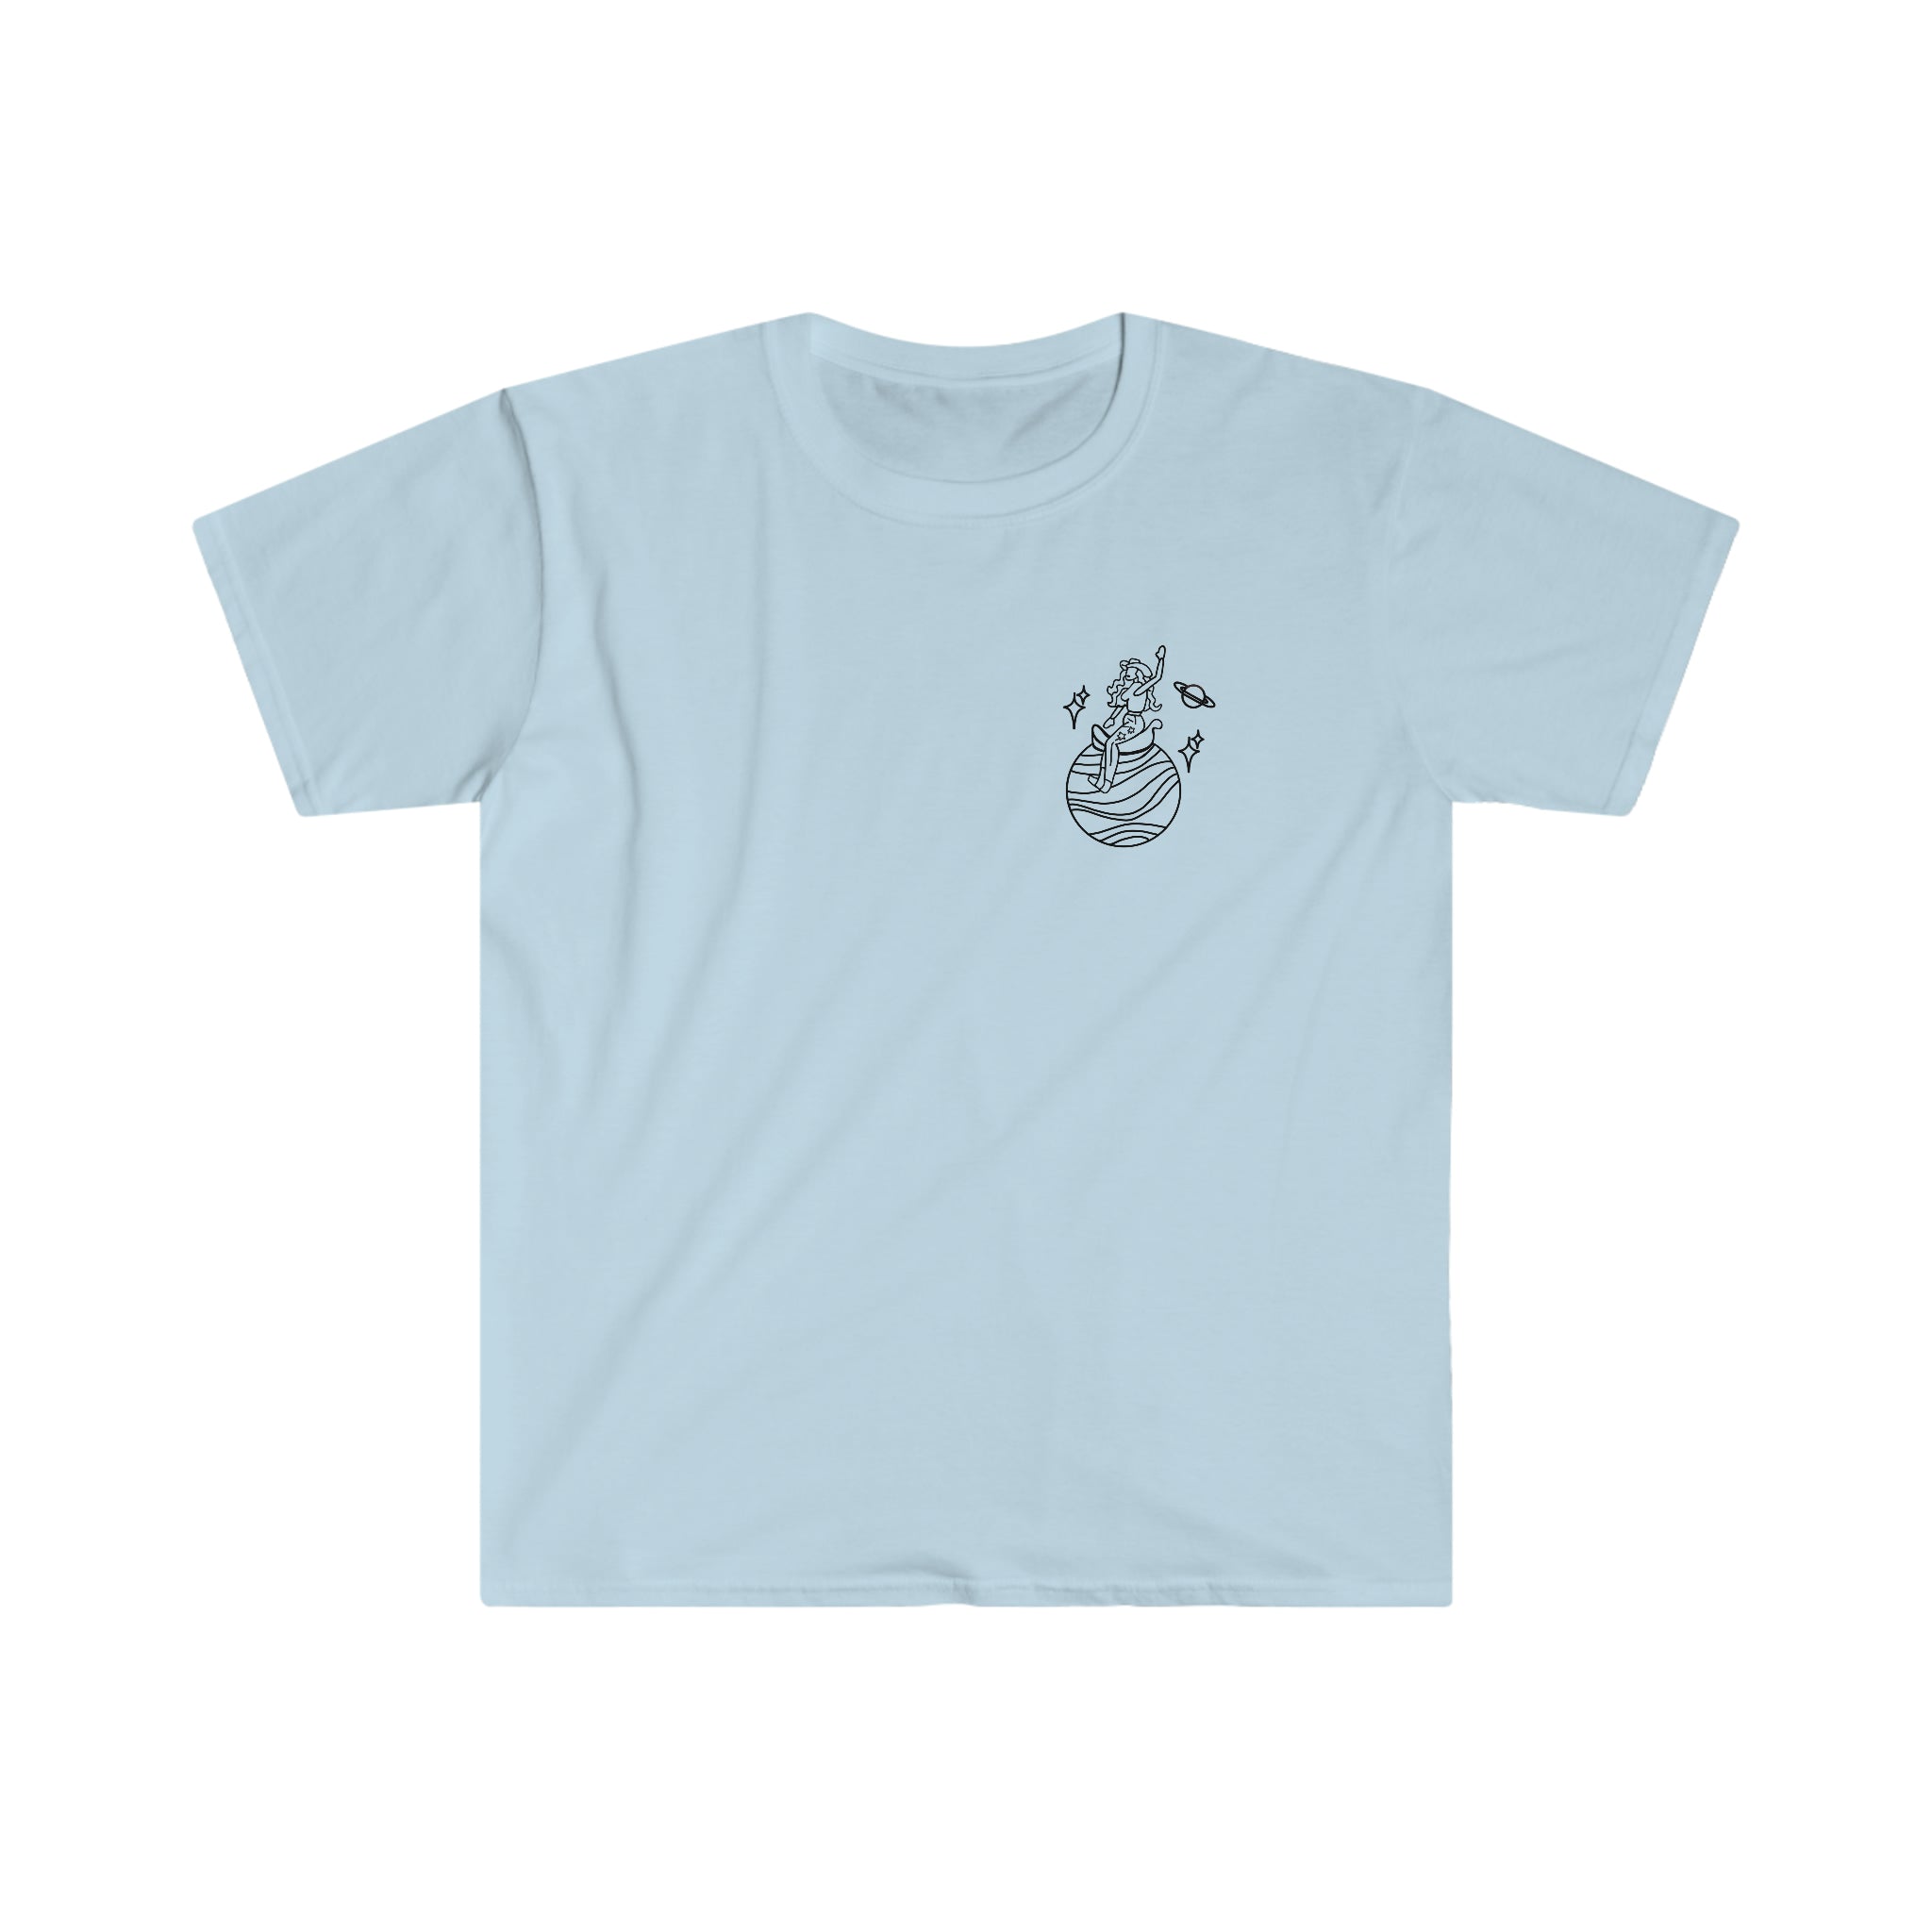 Reverse Cowgirl Graphic Tee